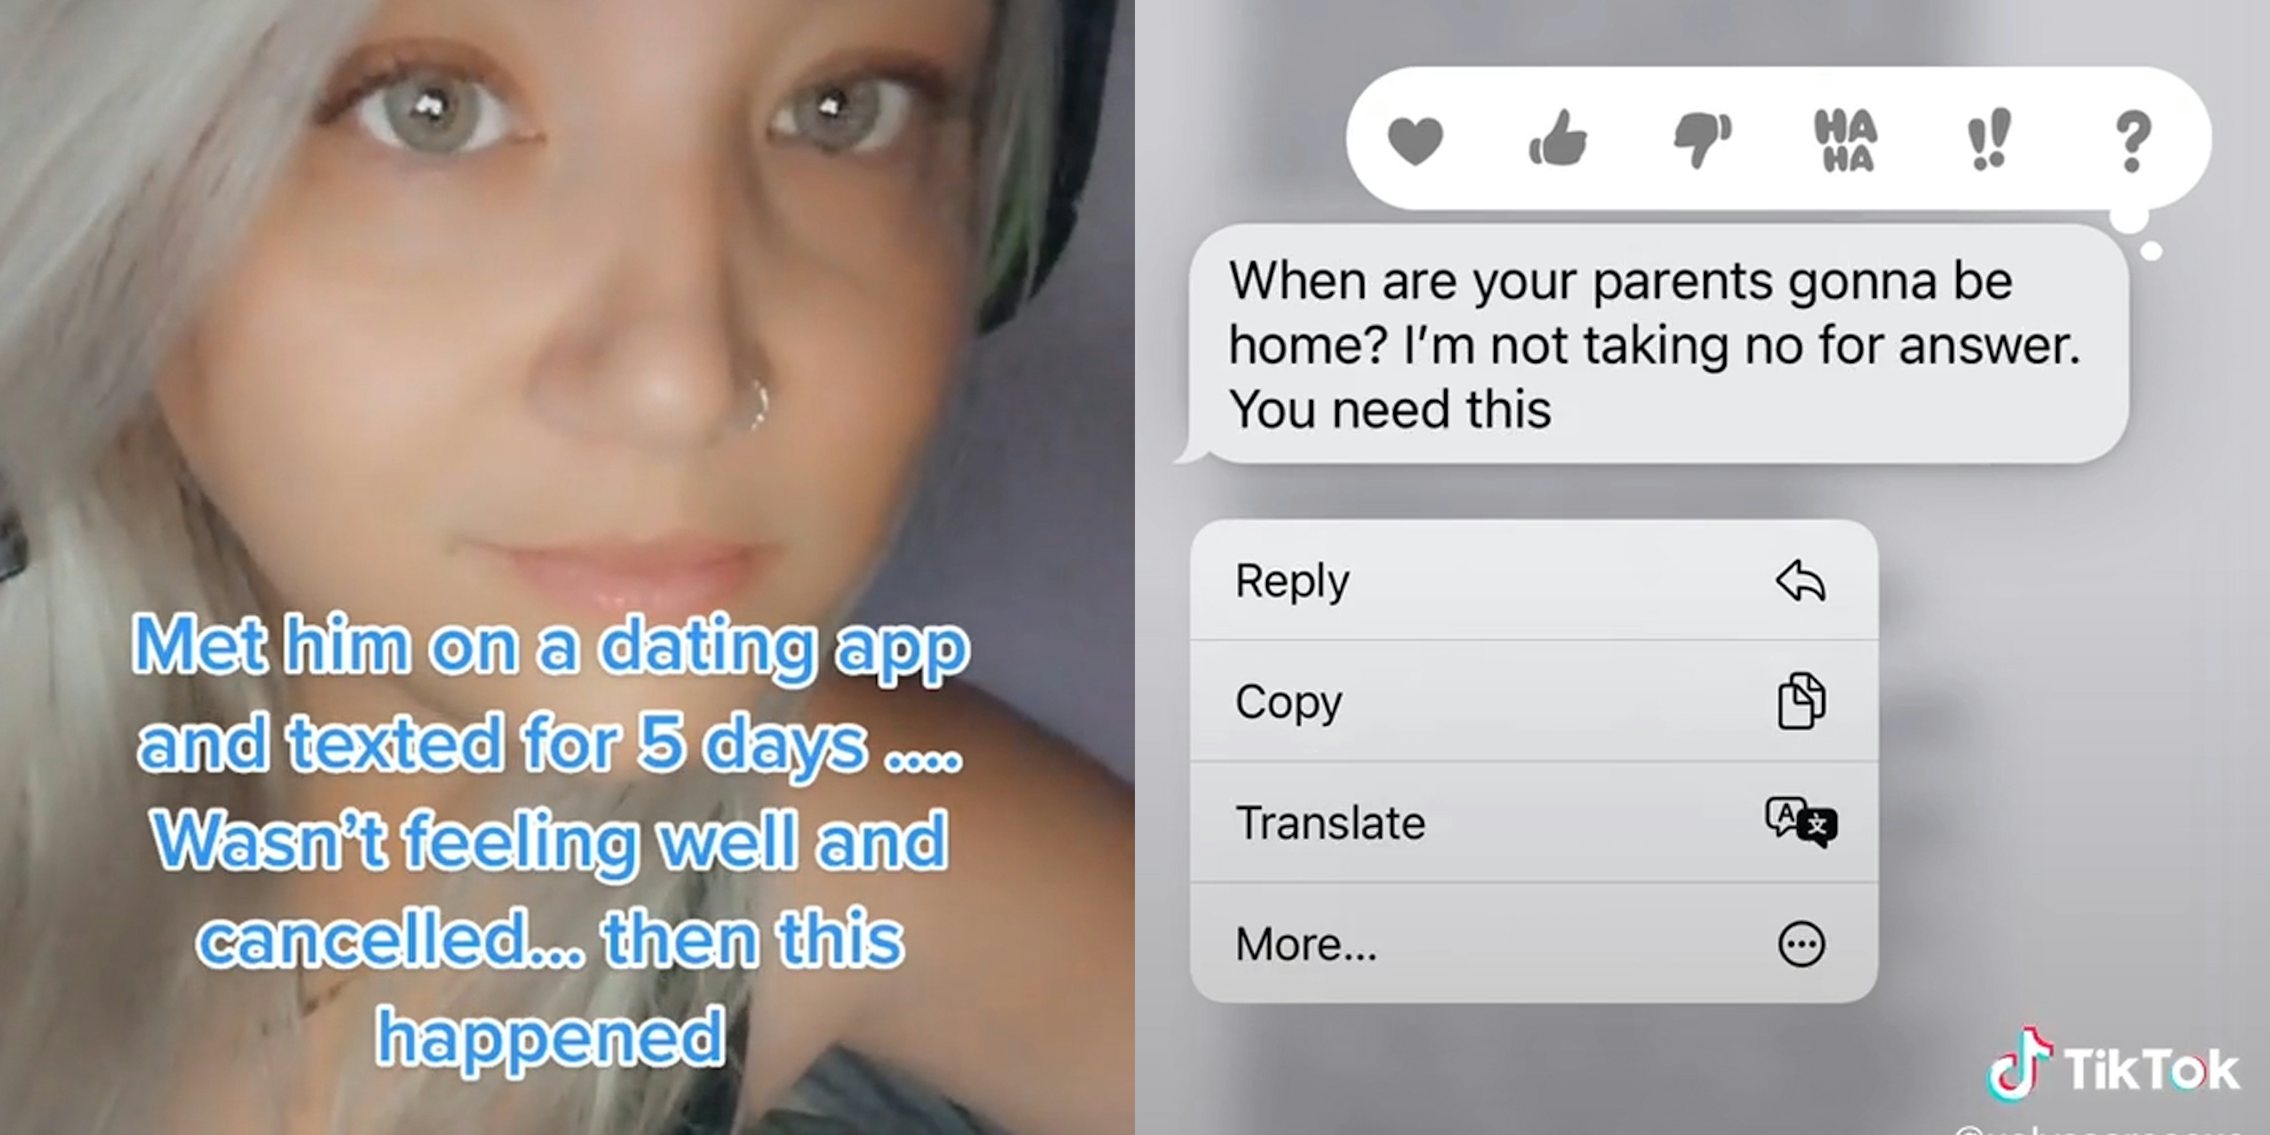 young woman with caption 'met him on a dating app and texted for 5 days.... wasn't feeling well and cancelled... then this happened' (l) text message that reads 'when are your parents gonna be home? I'm not taking no for answer. You need this' (r)